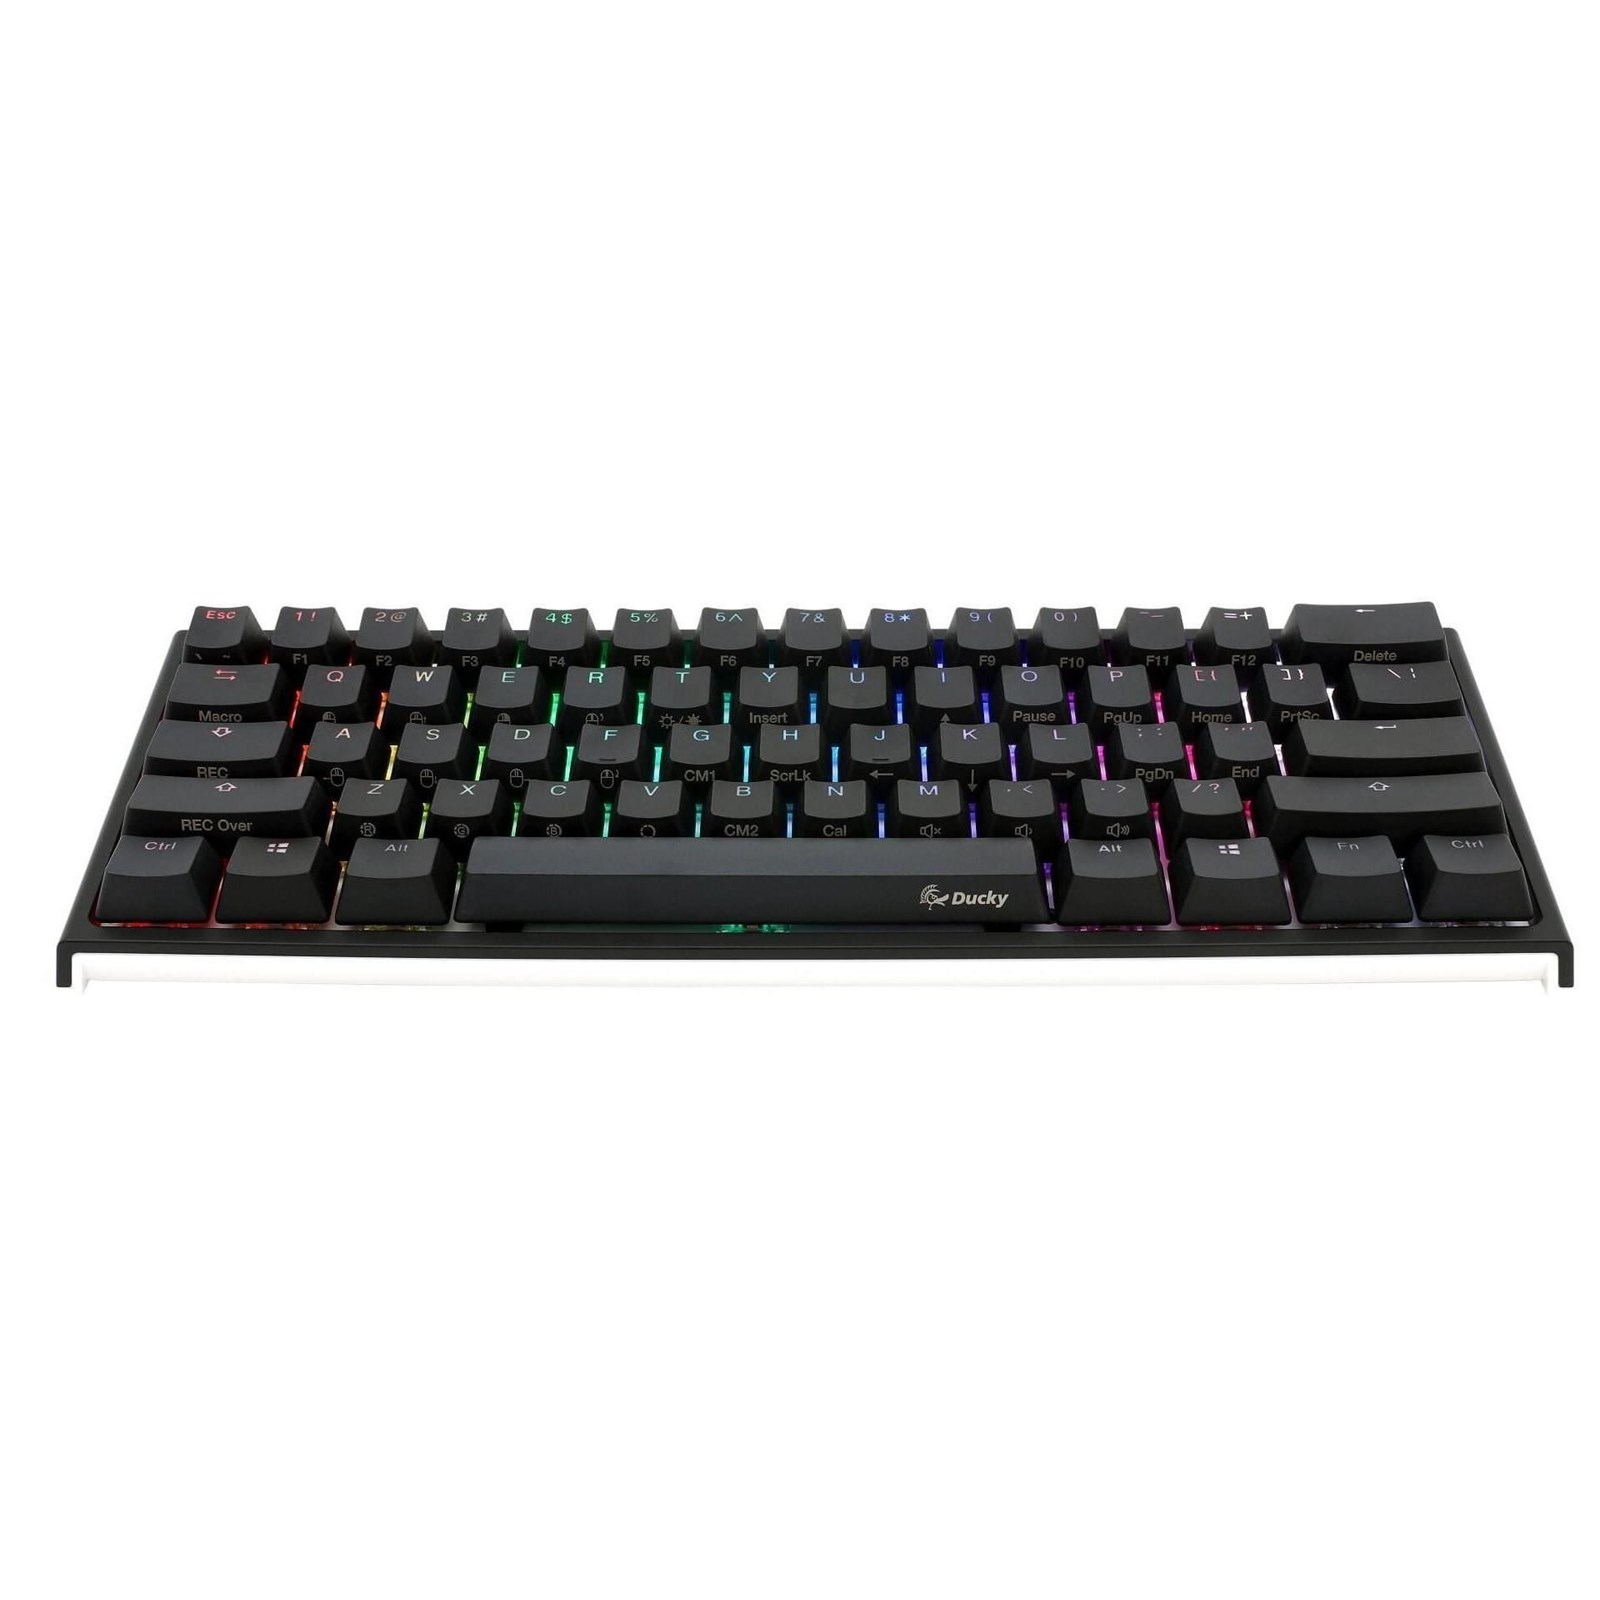 Ducky One 2 Mini Rgb Mechanical Keyboard In Black With Cherry Mx Brown Switches Uk Layout Dkon61st Bukpdazt1 Ccl Computers